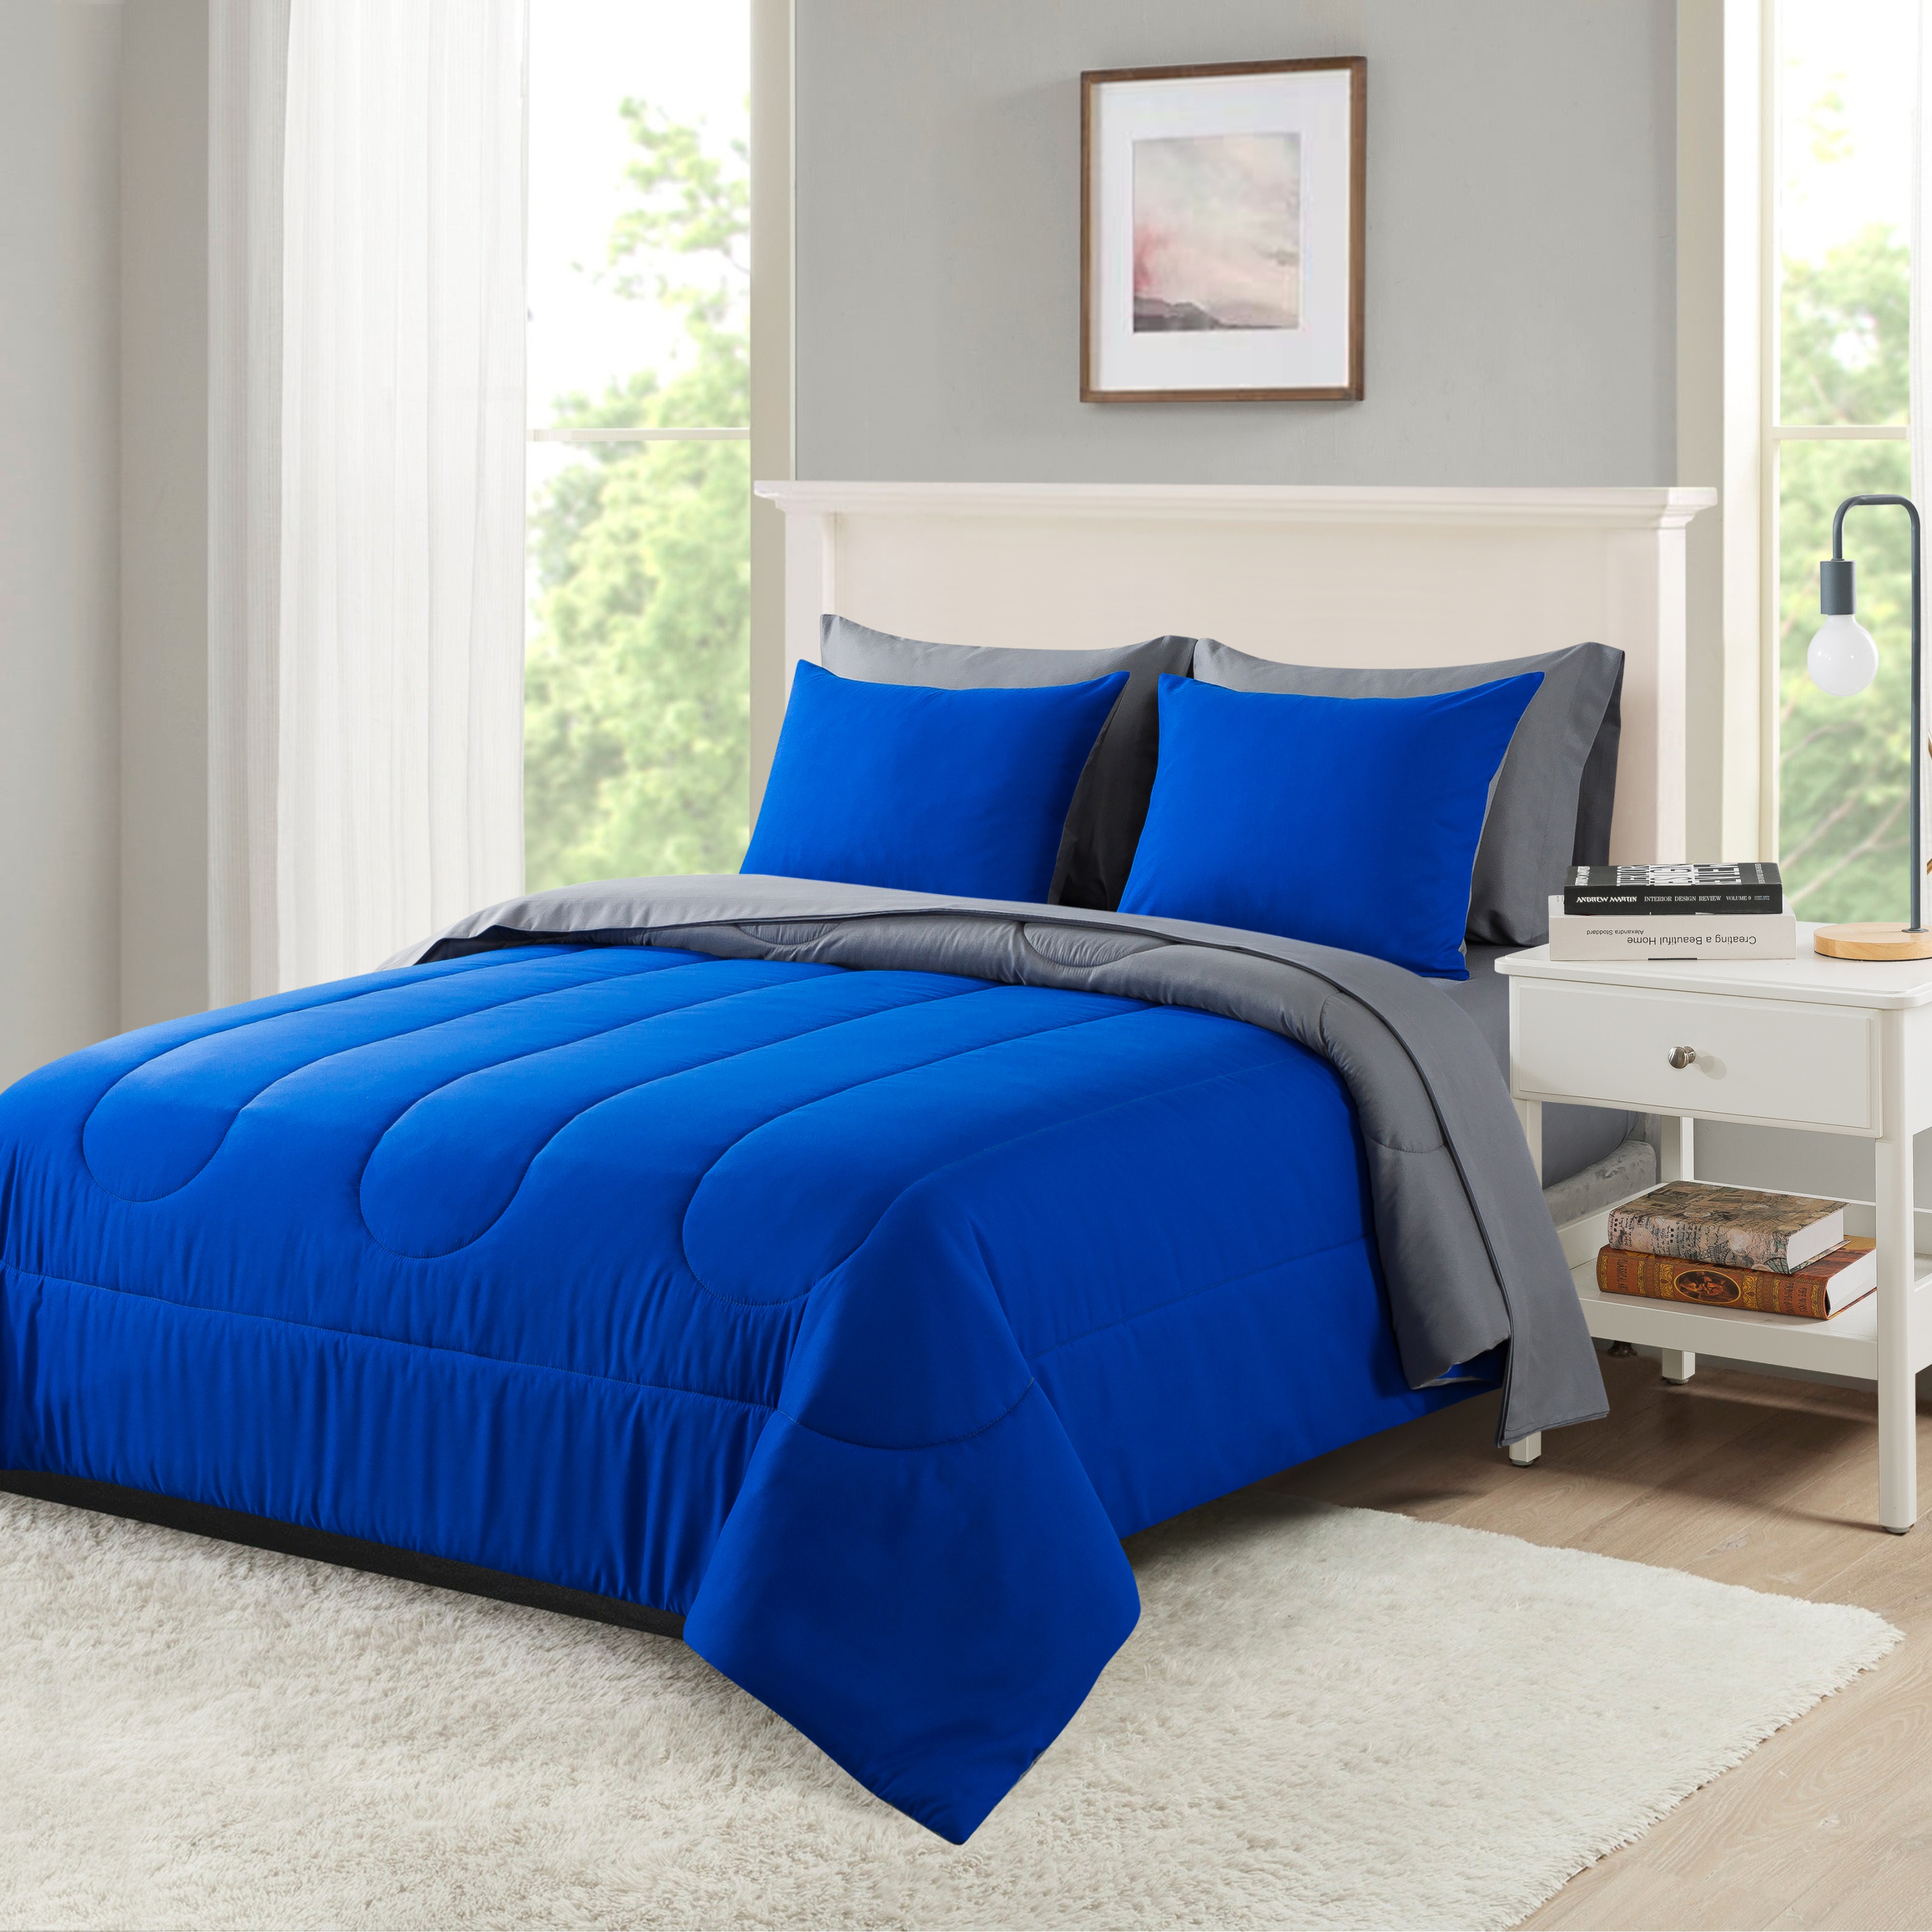 Mainstays Blue Reversible 7-Piece Bed in a Bag Comforter Set with Sheets, Queen - image 2 of 12